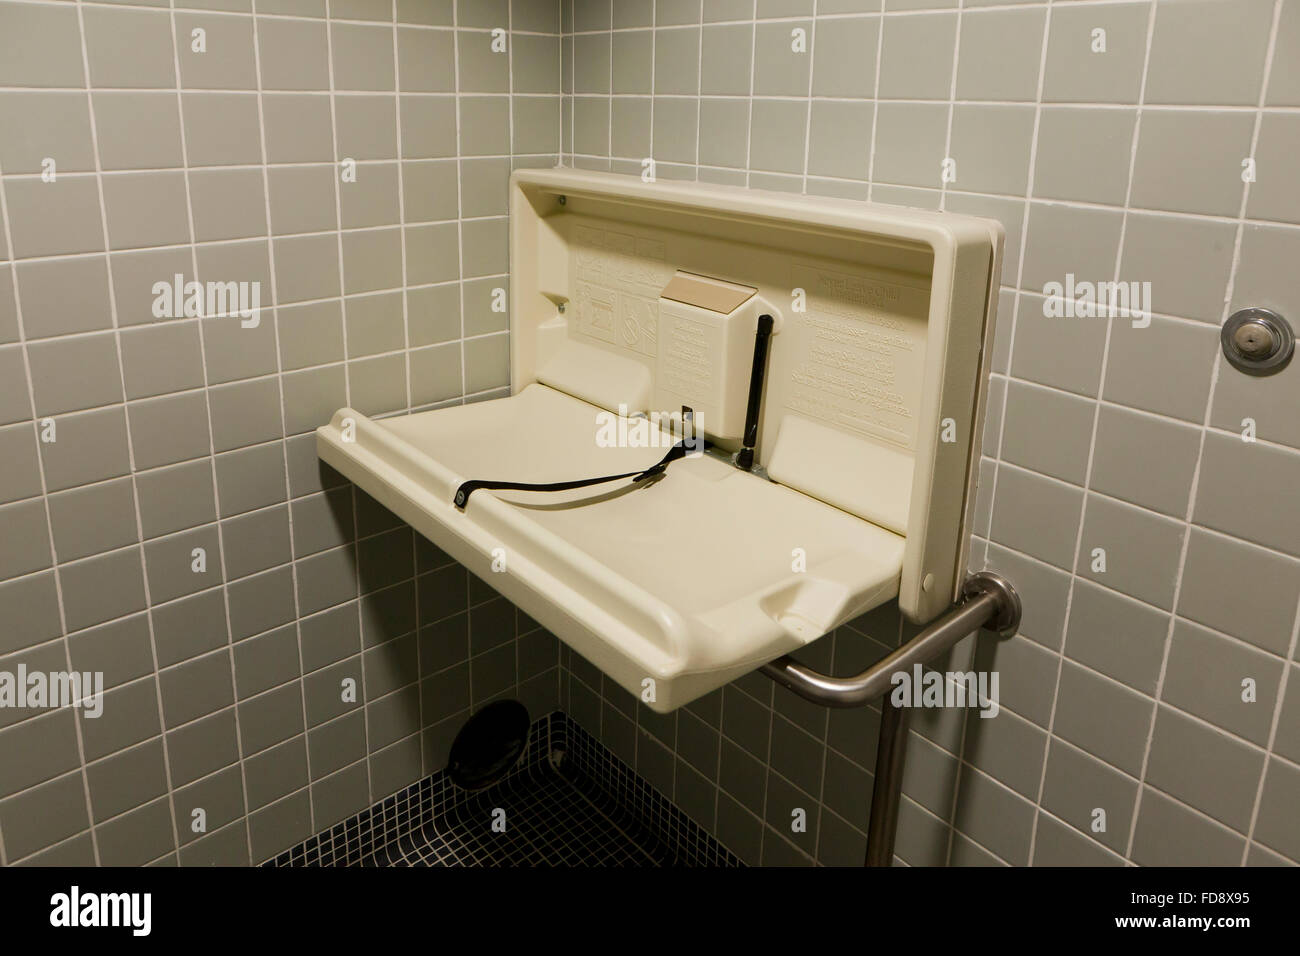 baby change table public restrooms